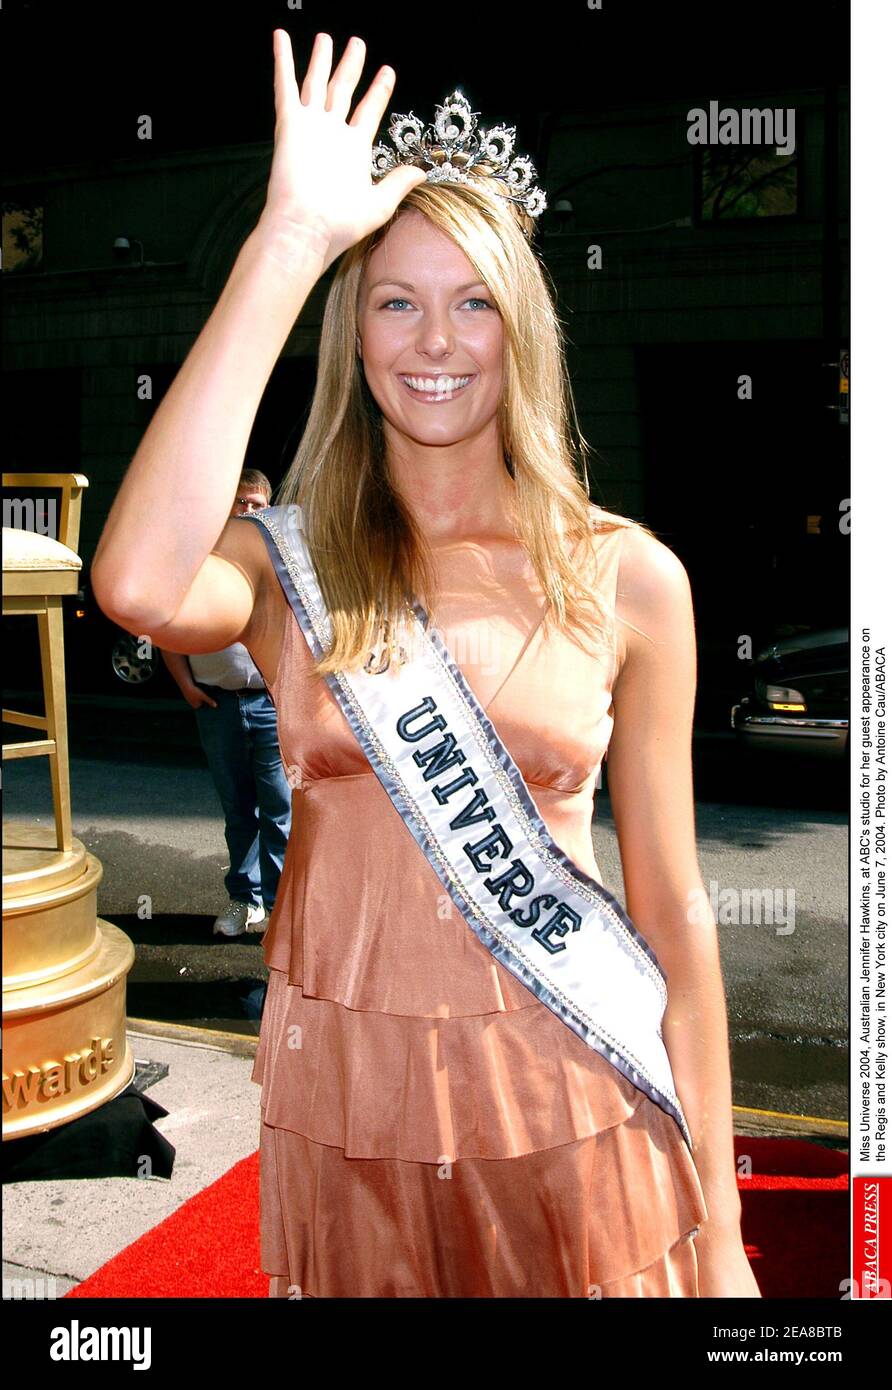 Miss Universe 2004, Australian Jennifer Hawkins, at ABC's studio for her guest appearance on the Regis and Kelly show, in New York city on June 7, 2004. Photo by Antoine Cau/ABACA Stock Photo